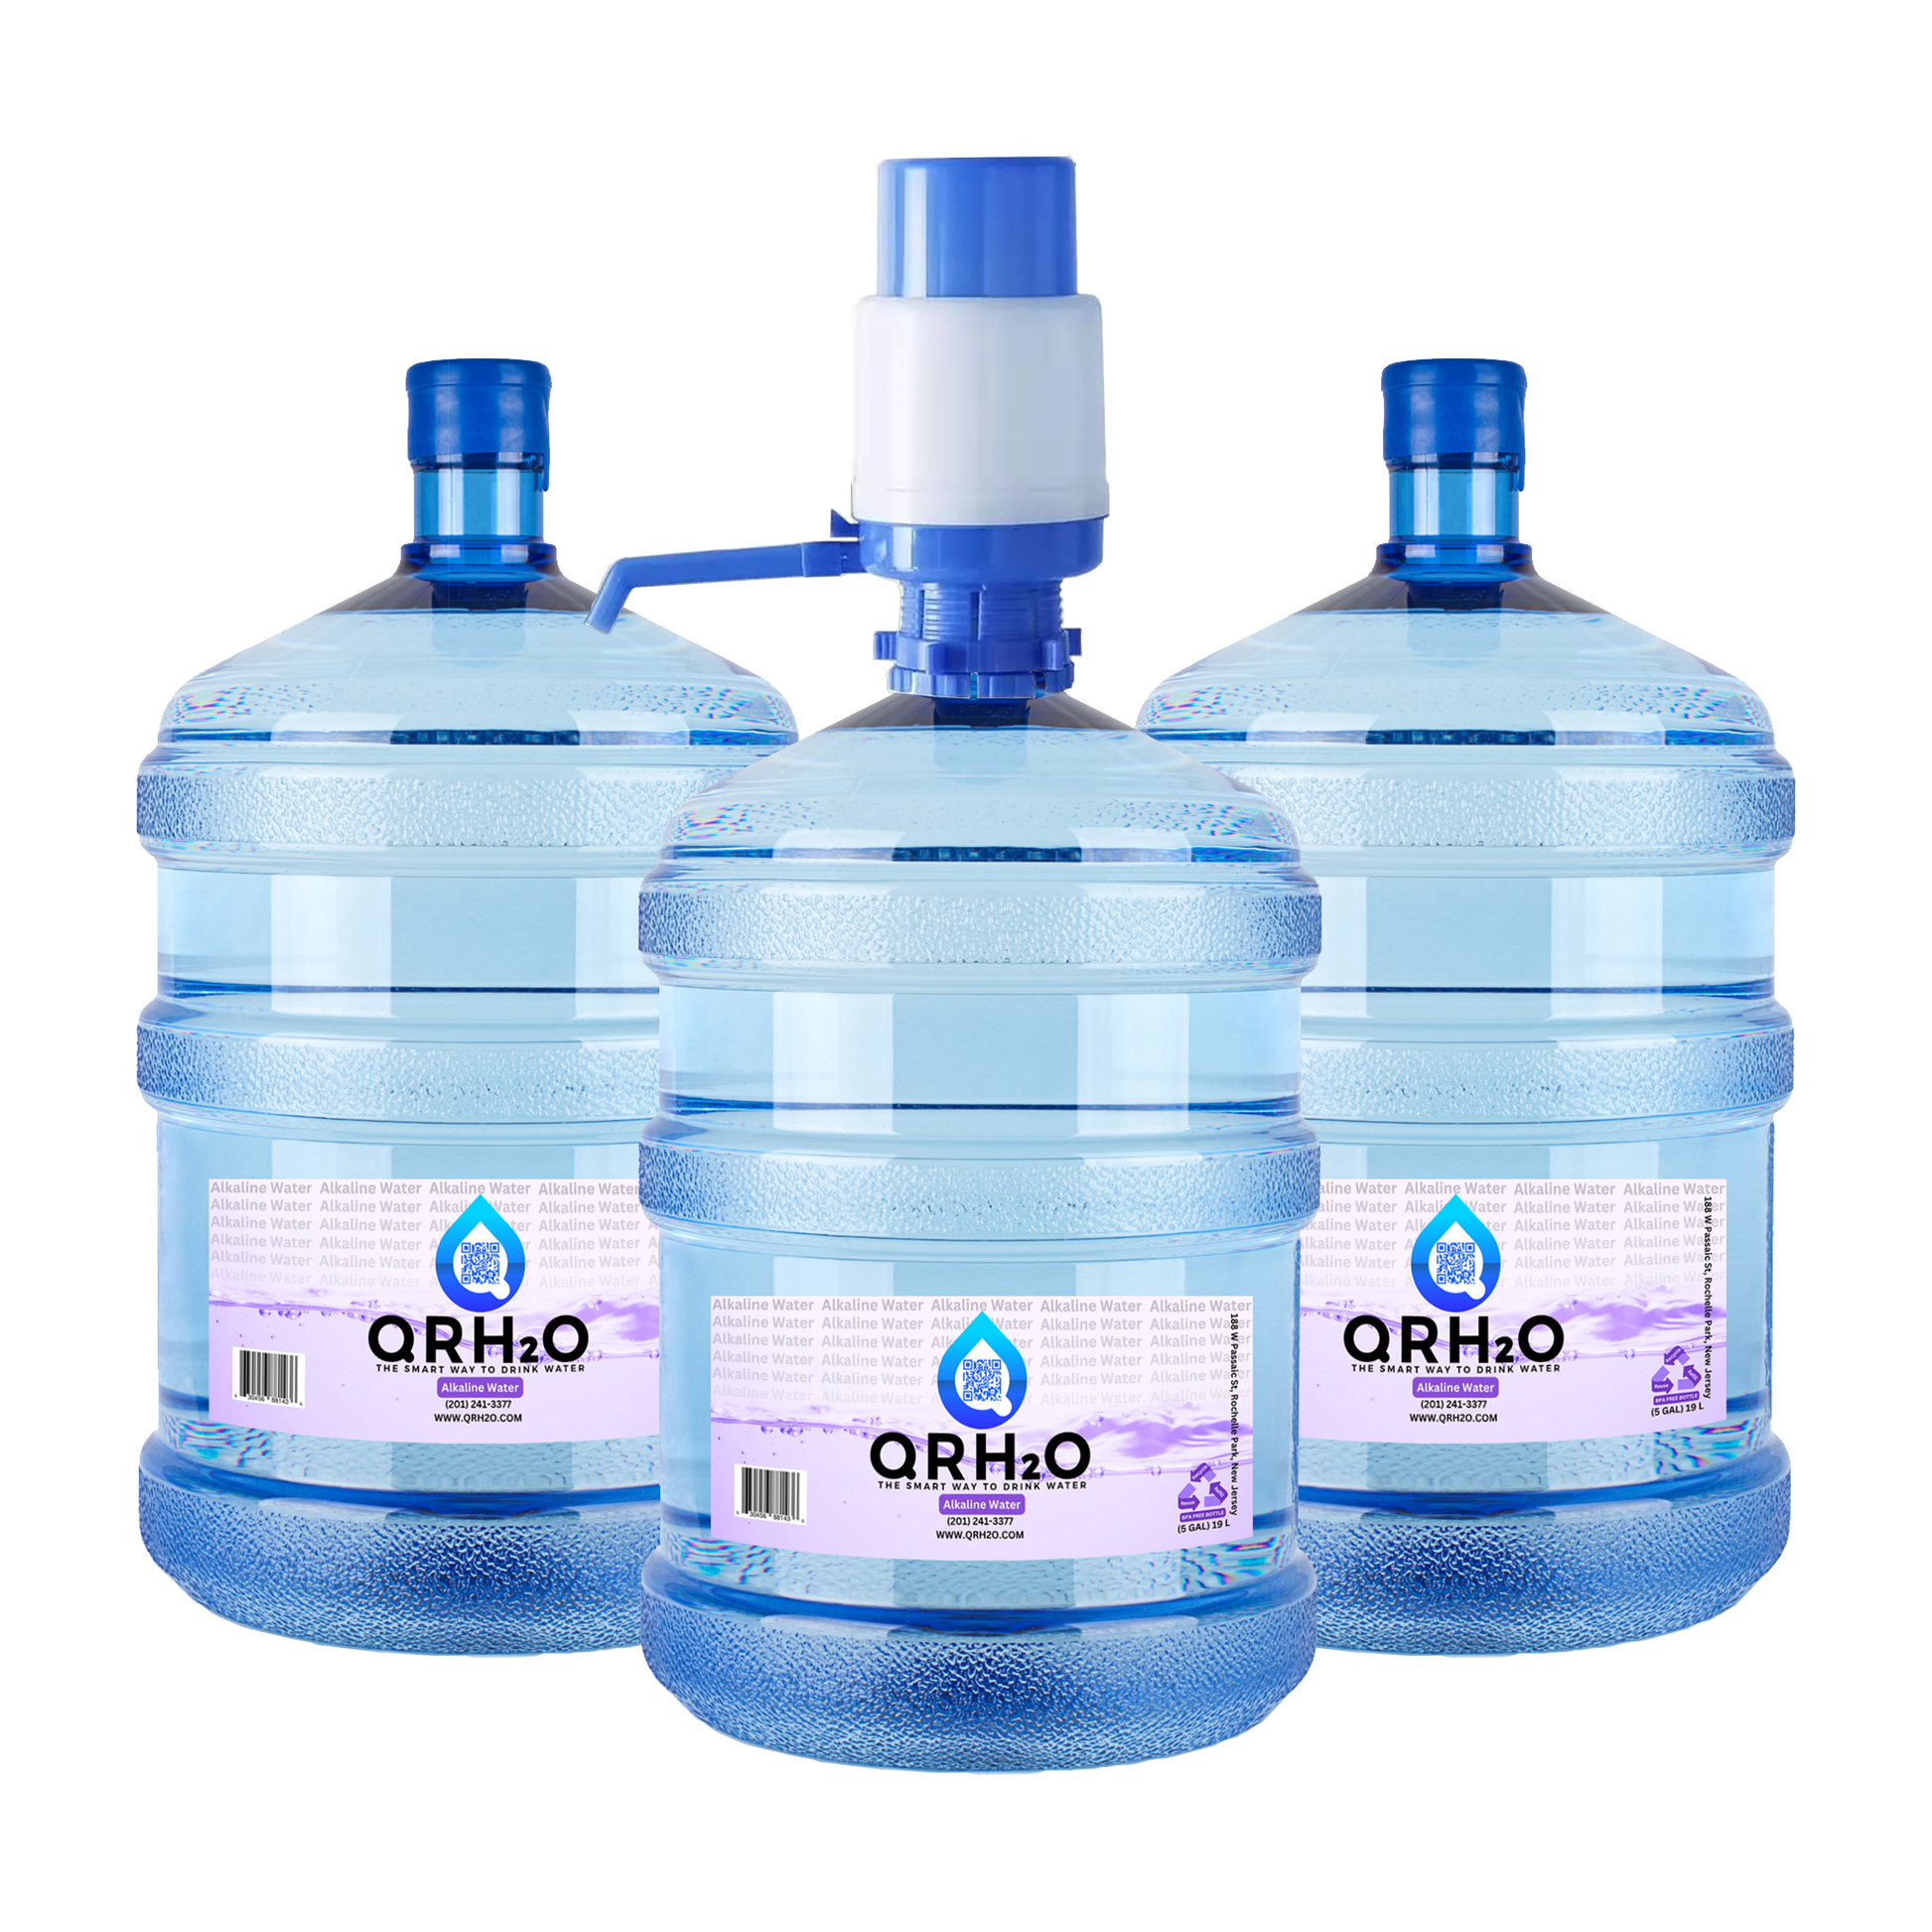 Bulk Water Delivery: Get 3 of our high-quality 5-gallon water bottles and a free manual hand pump for easy dispensing at home or office.